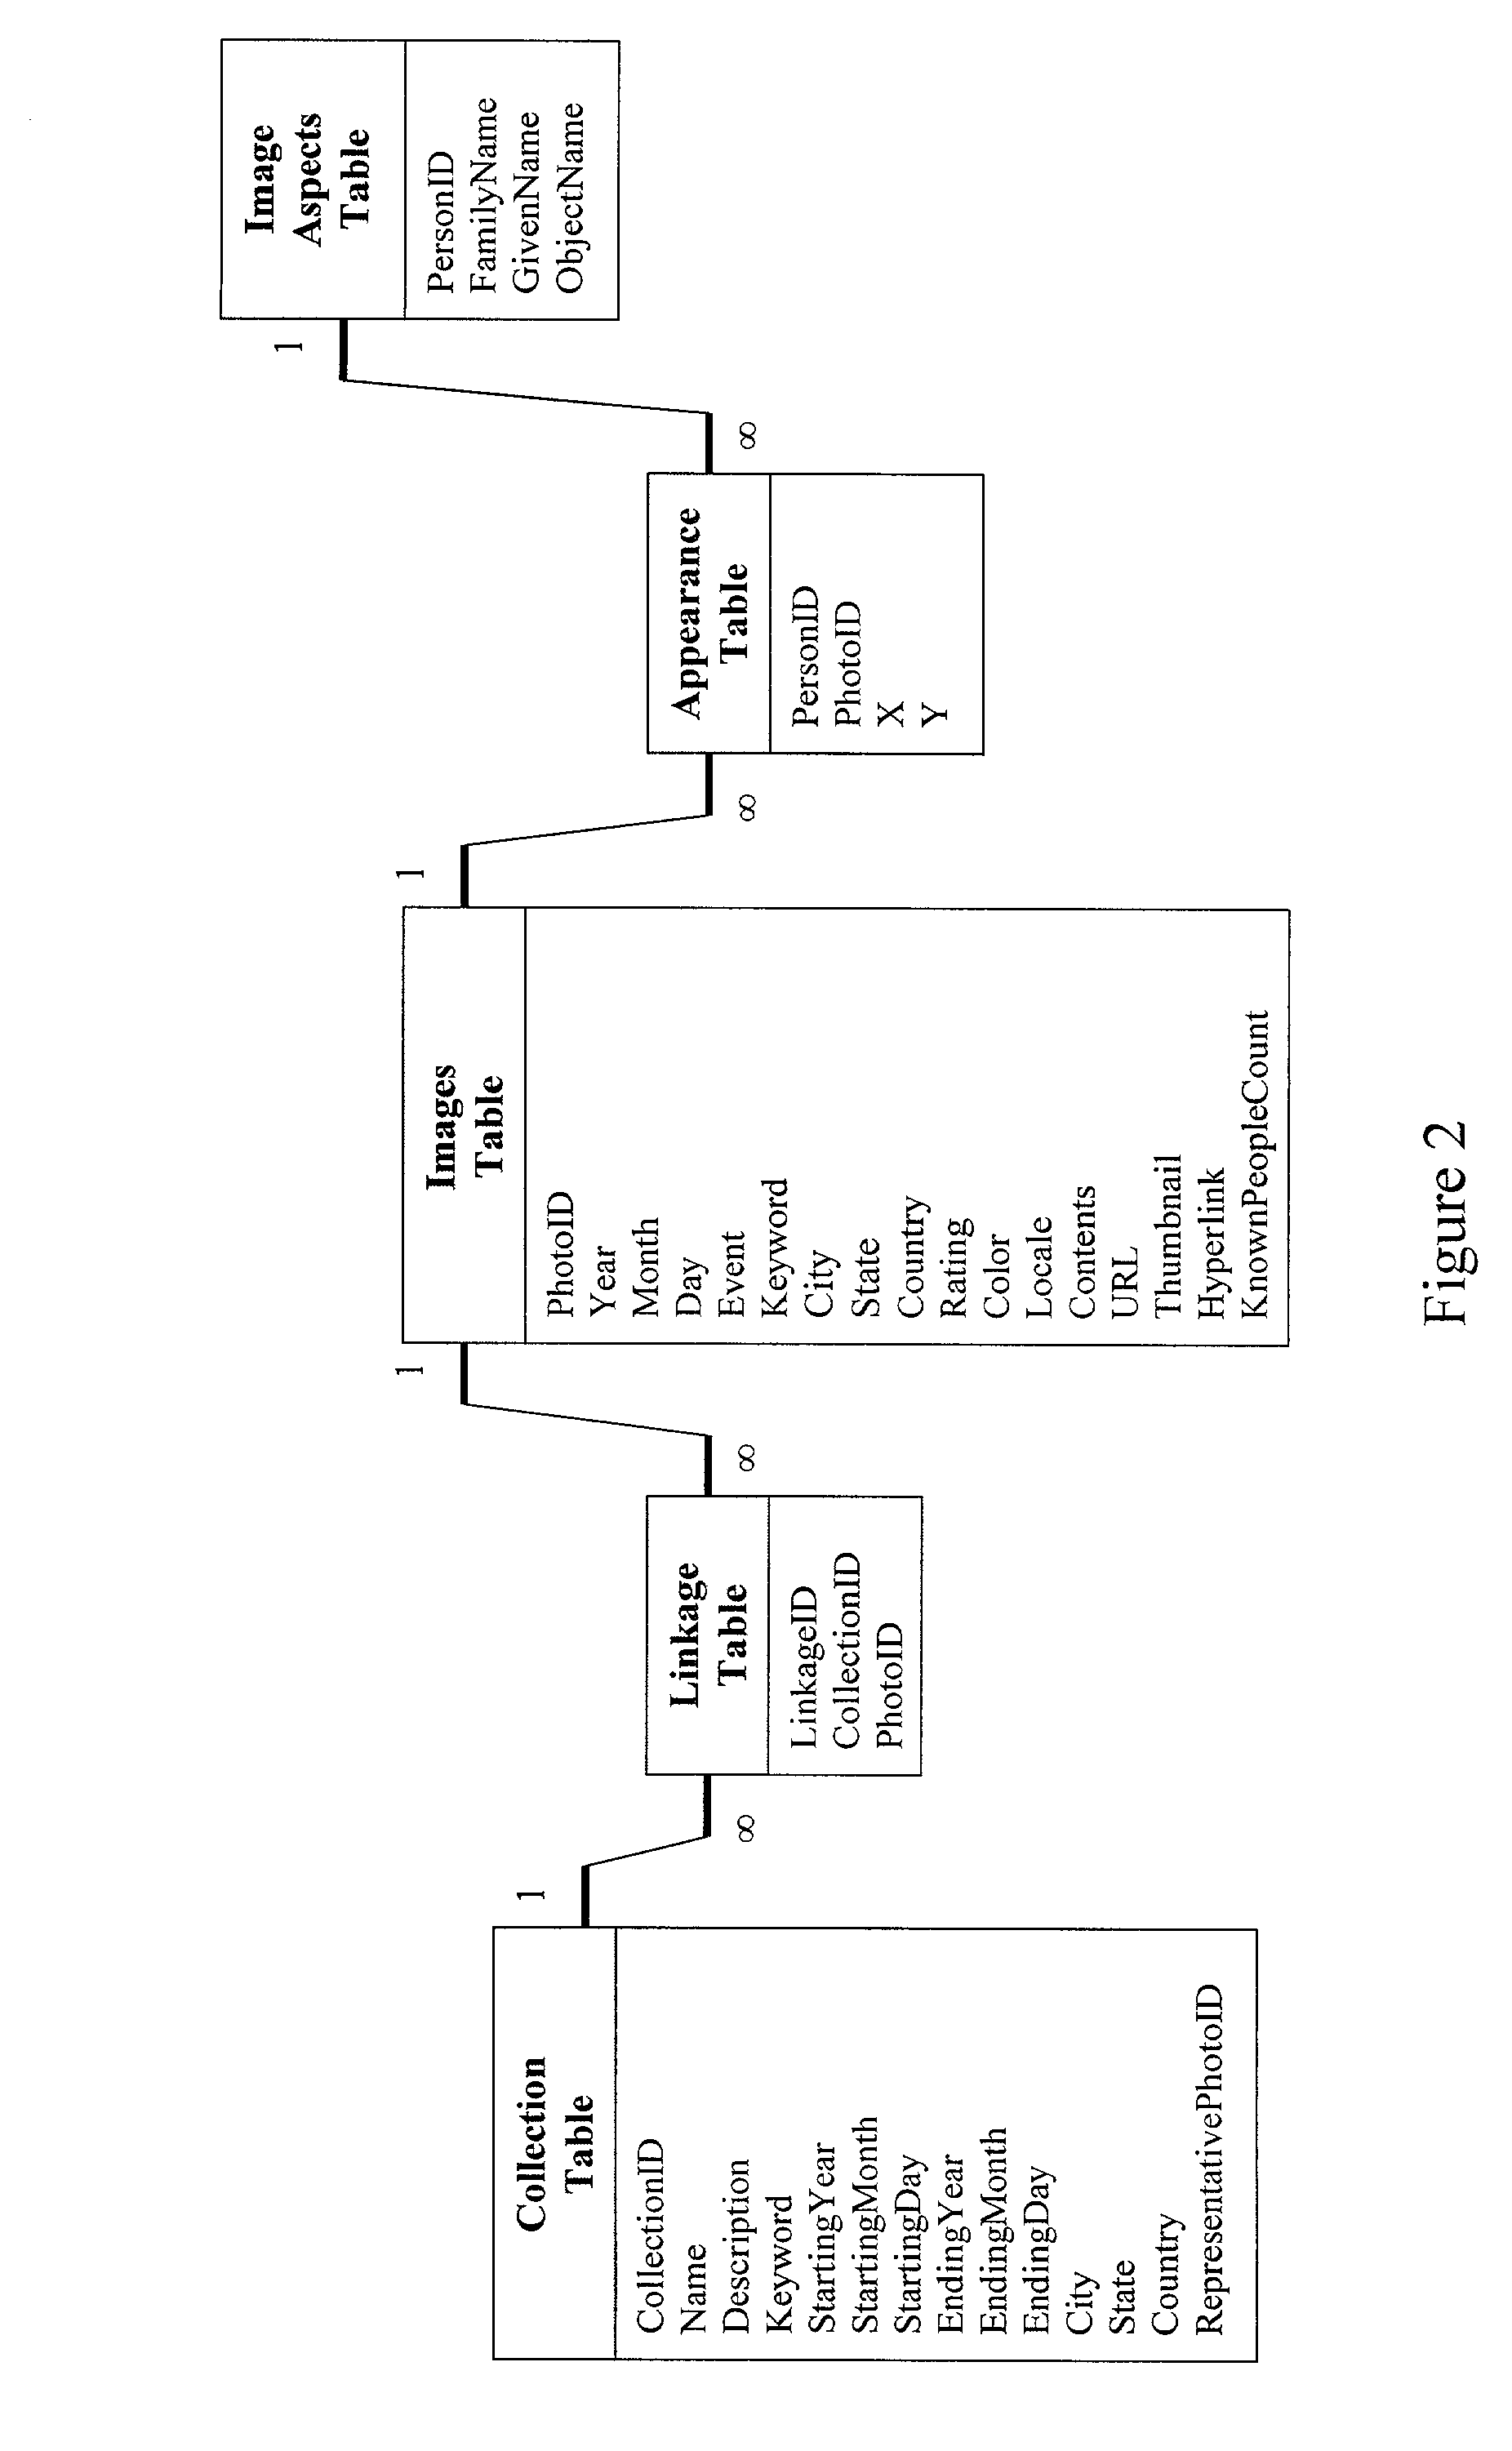 Methods for the electronic annotation, retrieval, and use of electronic images